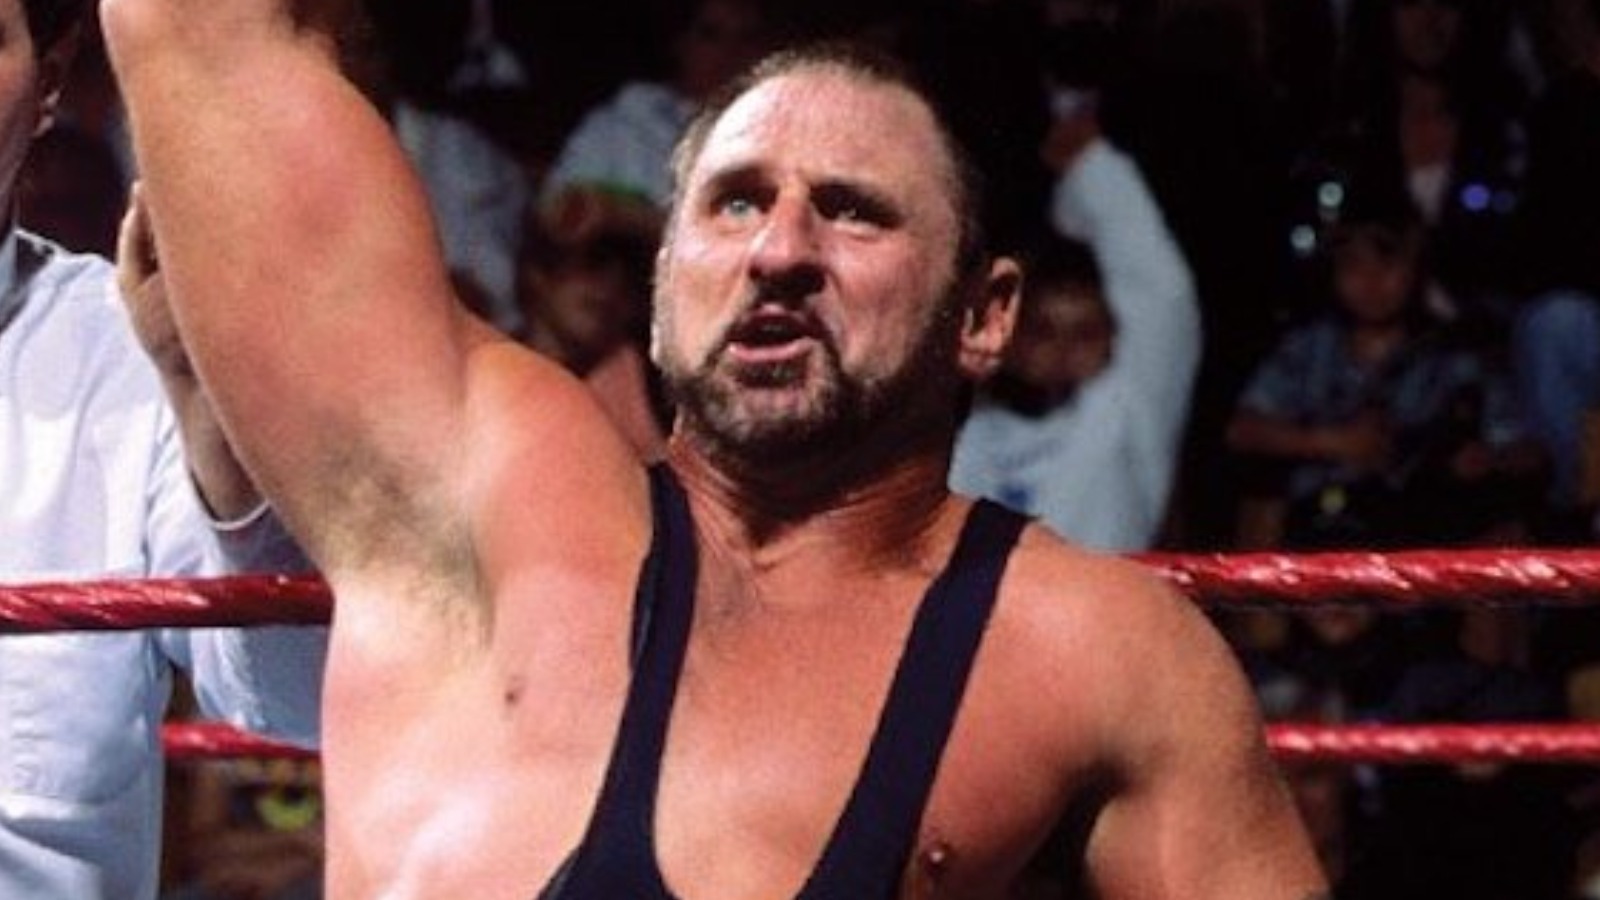 Bushwhacker Butch Dead, WWE Hall Of Famer's Passing Announced By Tag Team Partner